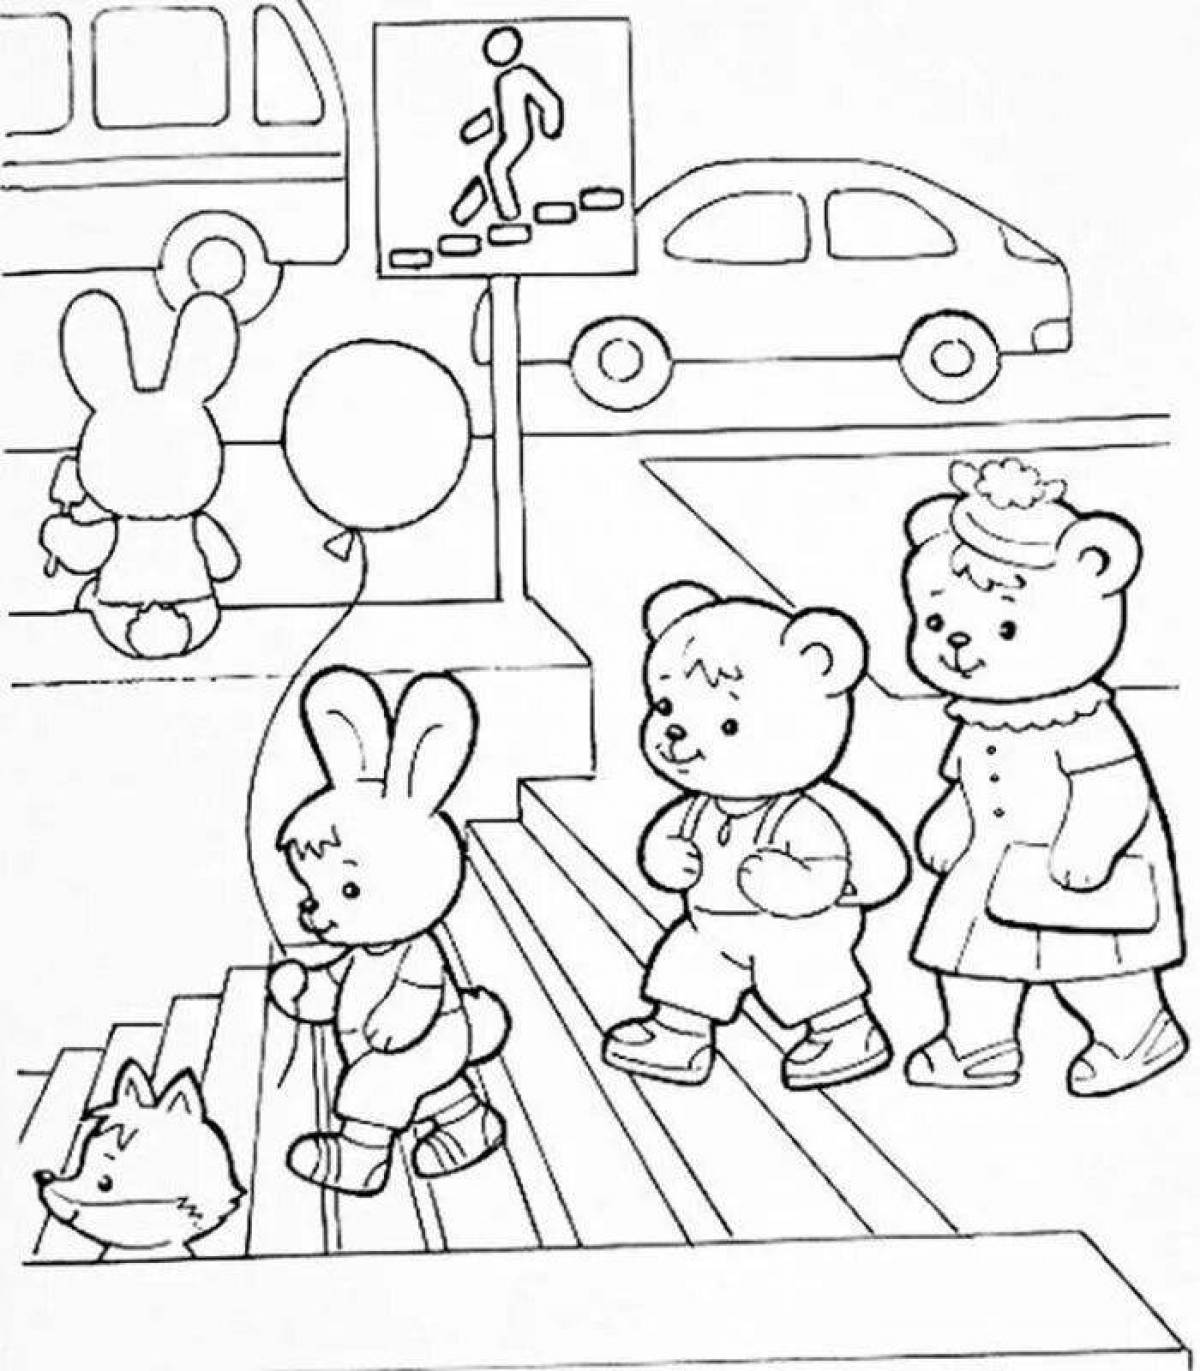 Colorful rules of the road coloring for children 6-7 years old